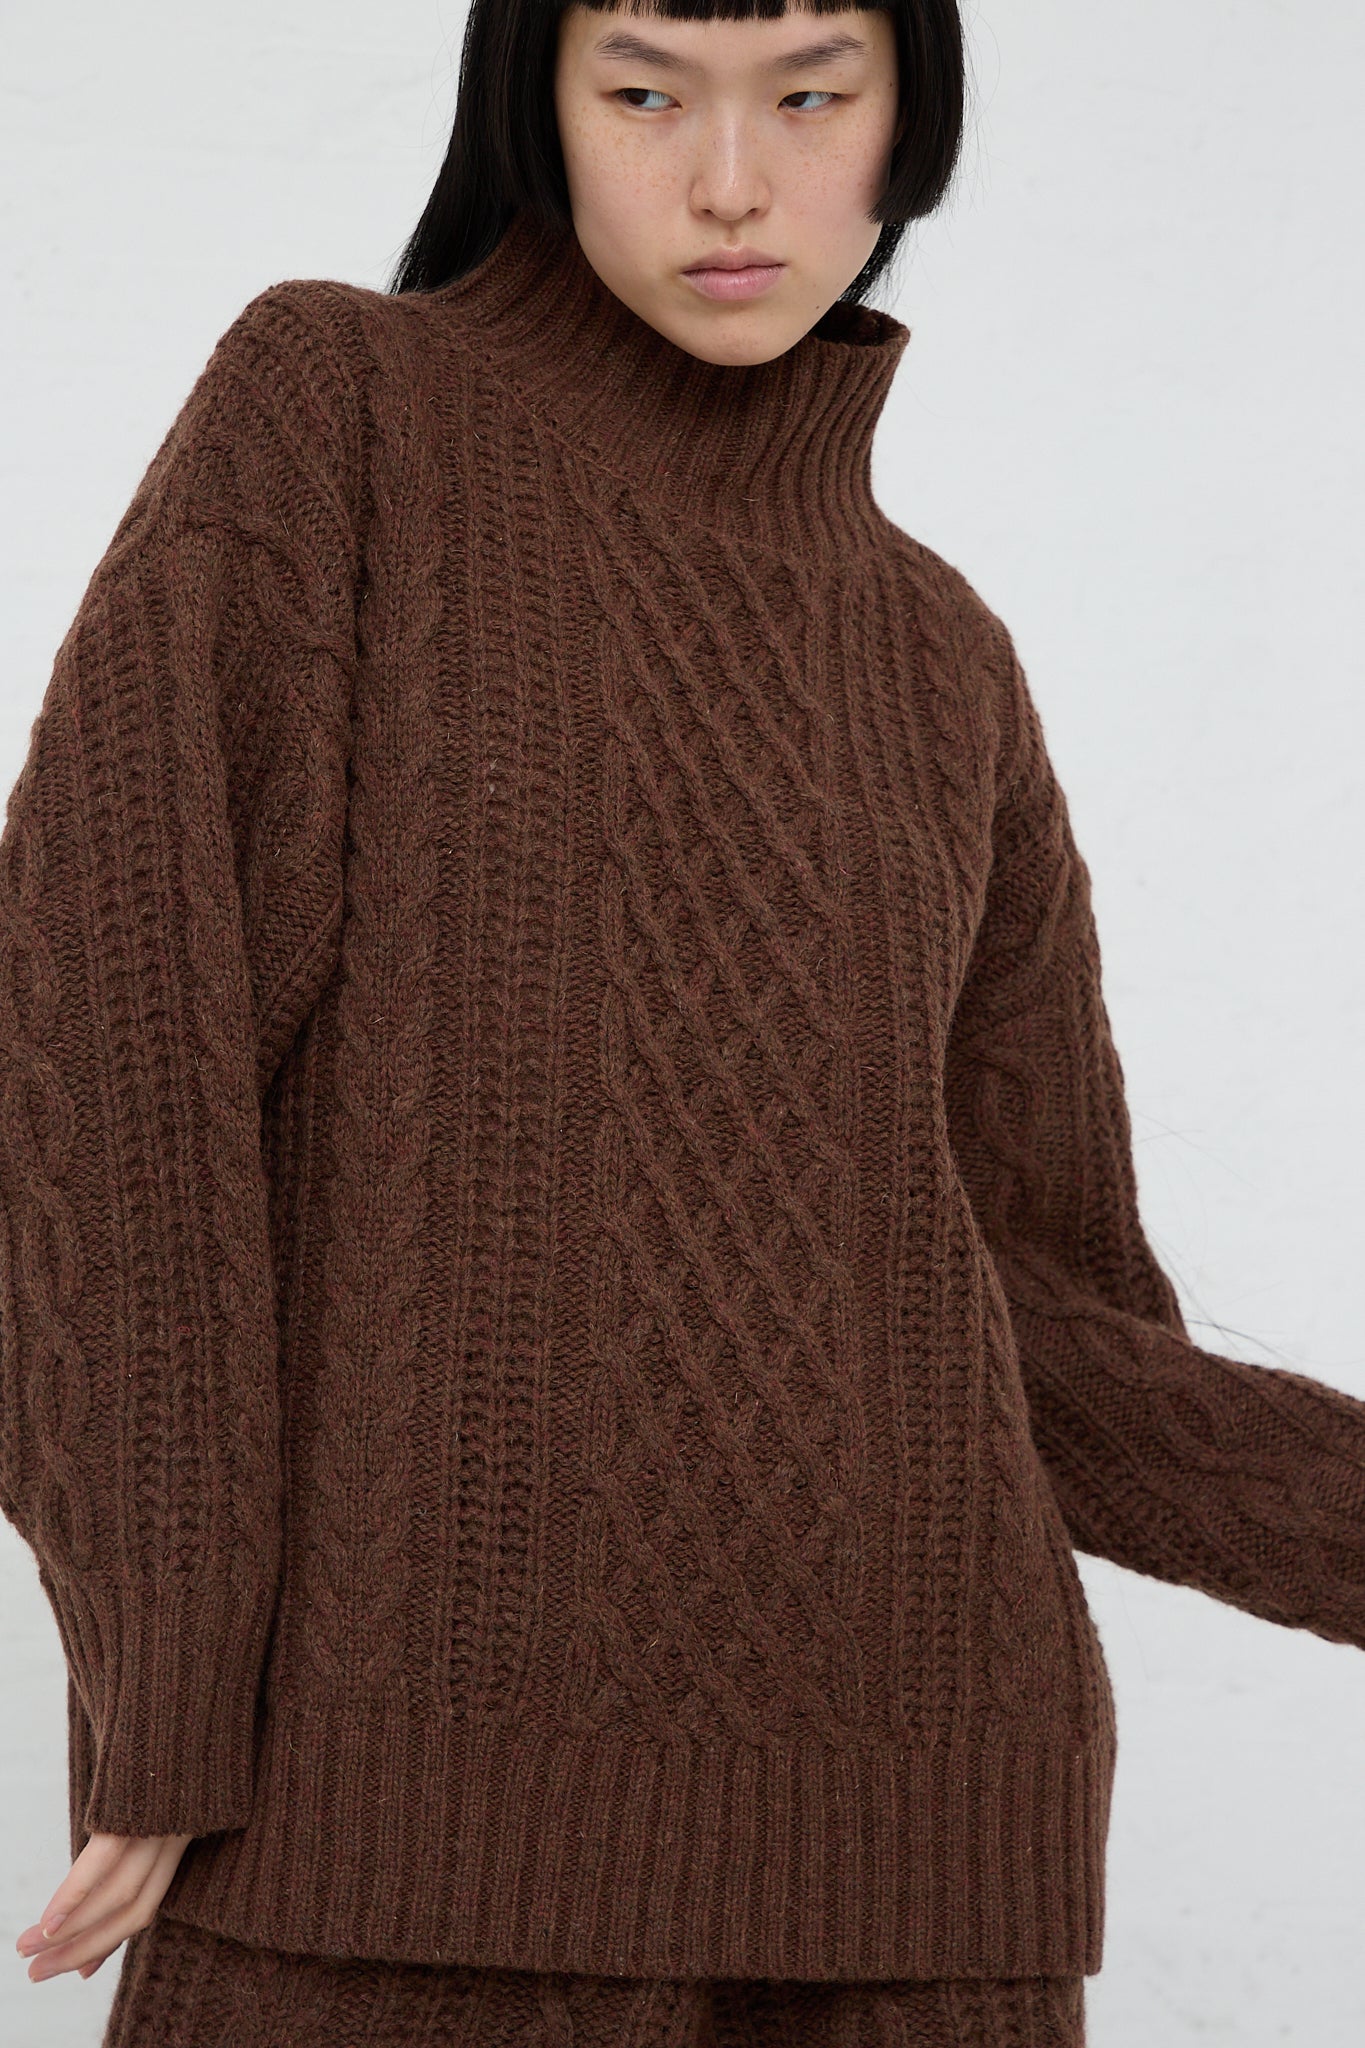 The model is wearing an Ichi Knit Turtleneck Pullover in Brown.